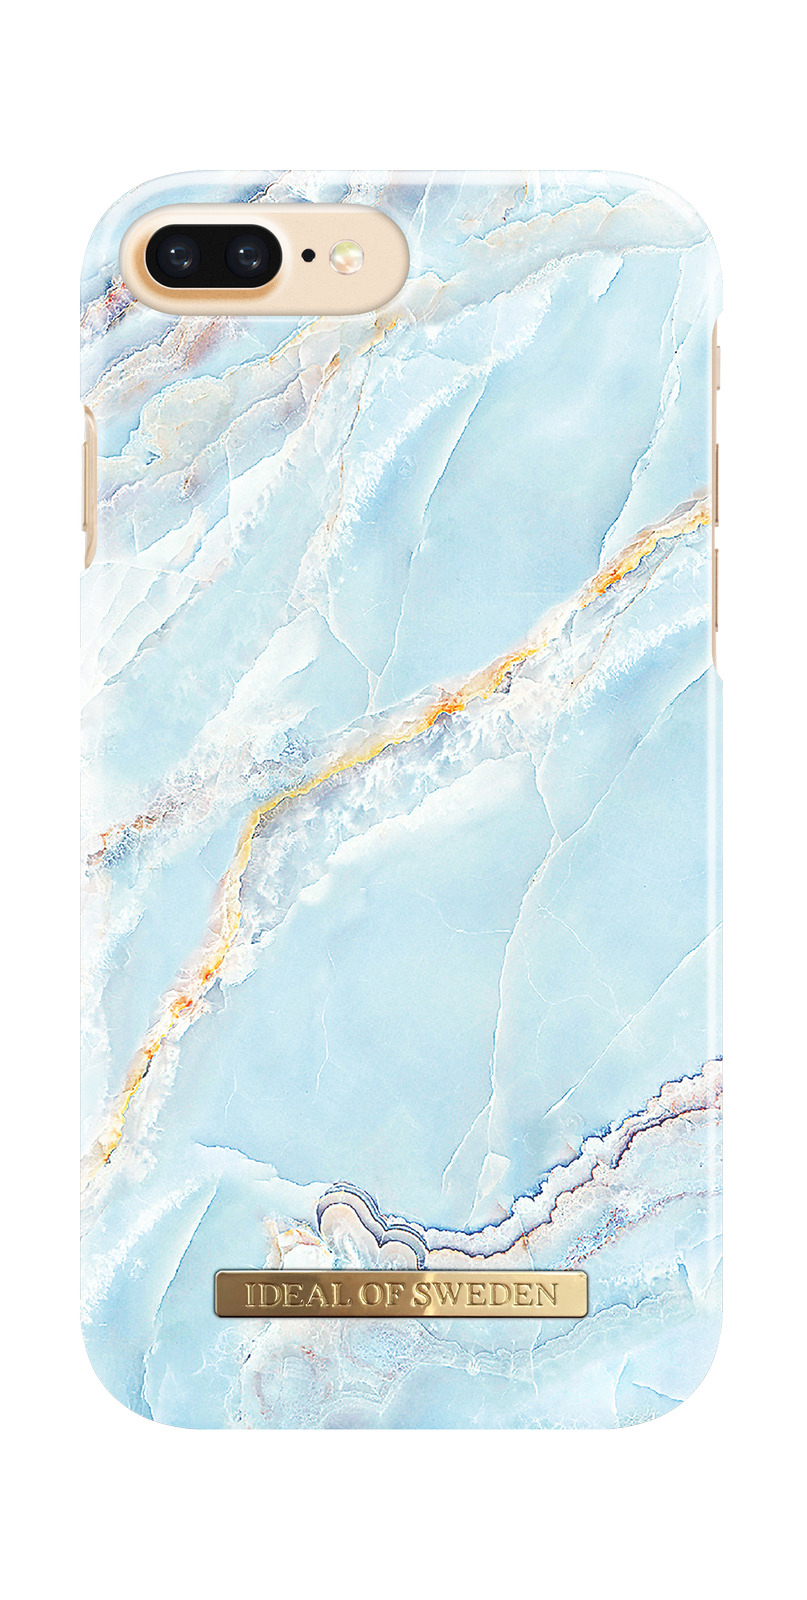 7 Plus, iPhone Backcover, Fashion, IDEAL iPhone Plus, Paradise Plus 8 Marble Apple, ,iPhone 6 OF SWEDEN